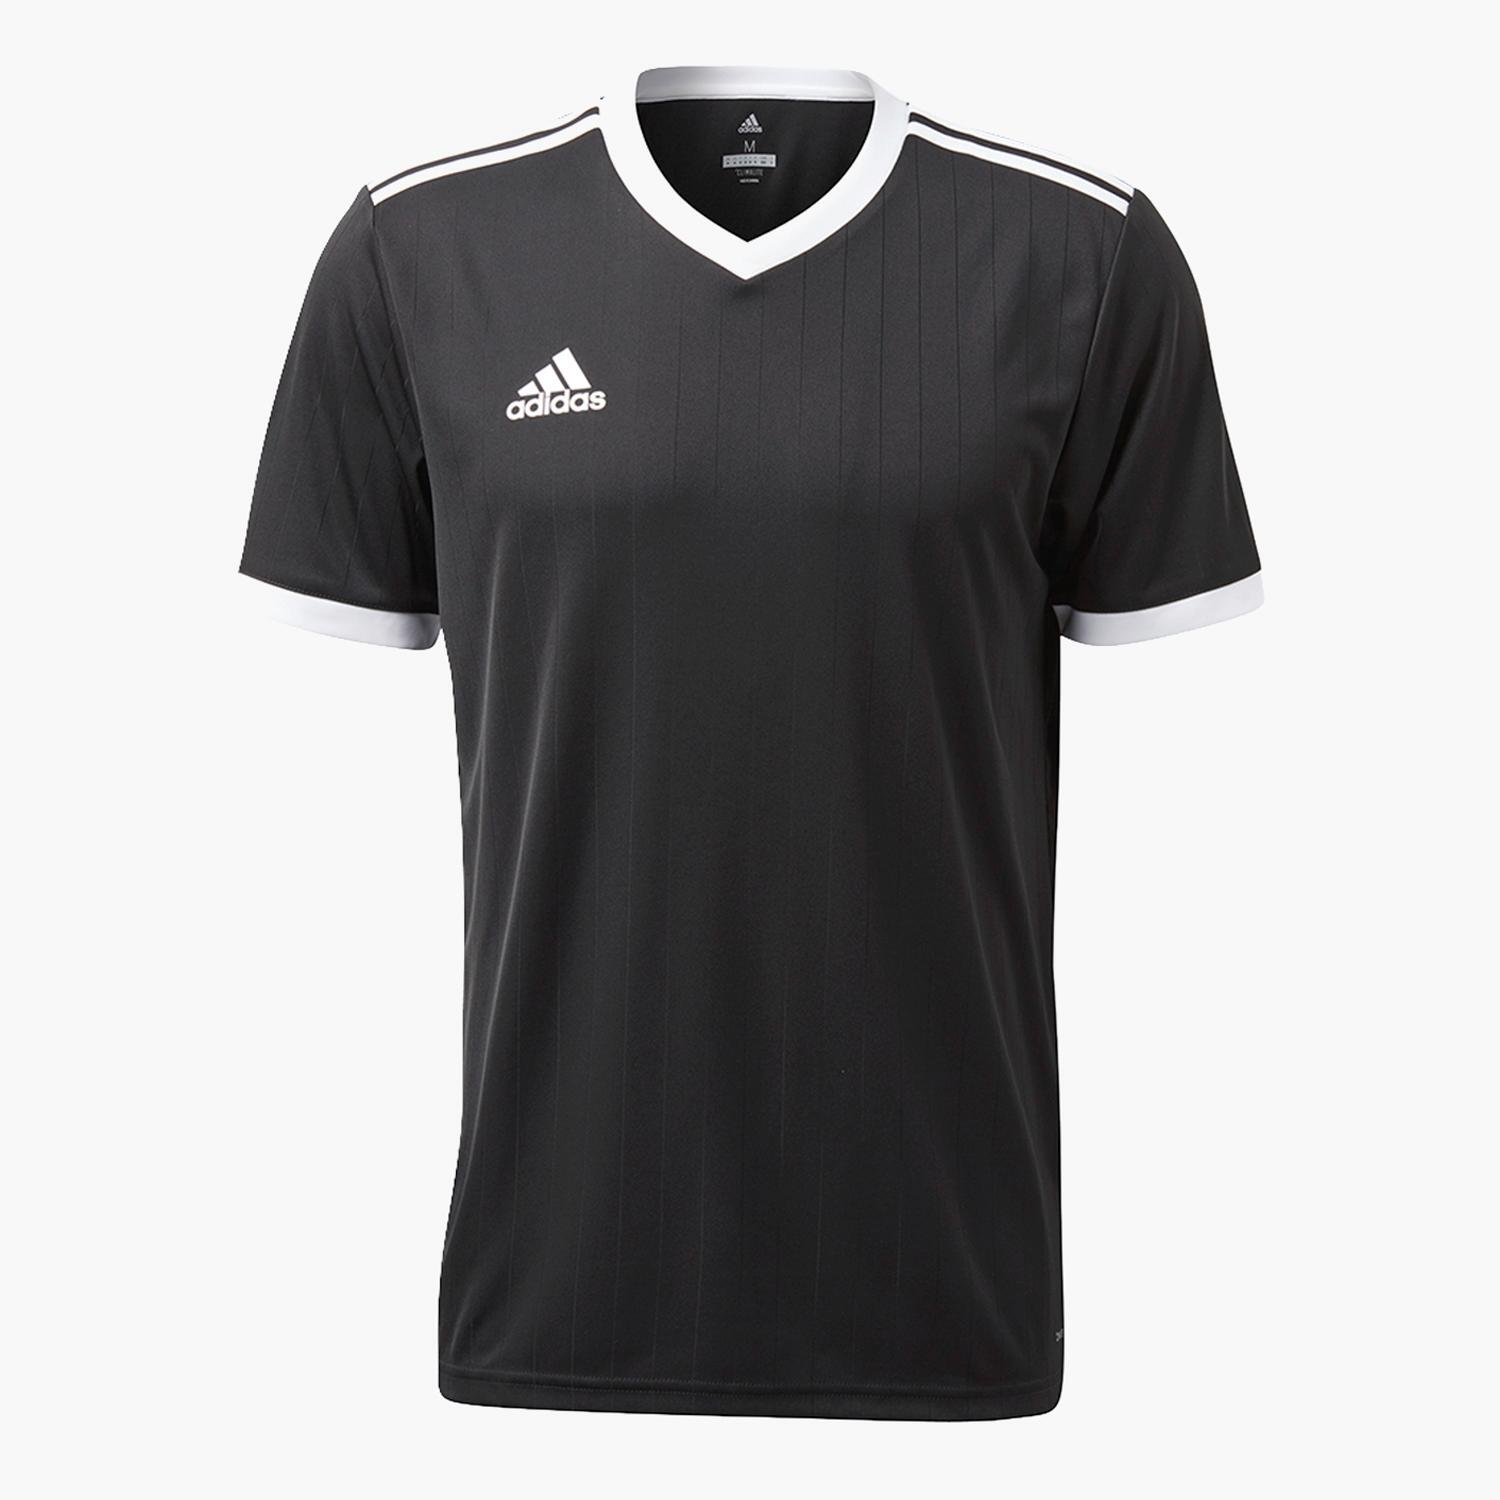 adidas Tabela 18 - Noir - T-shirt Football Homme sports taille S